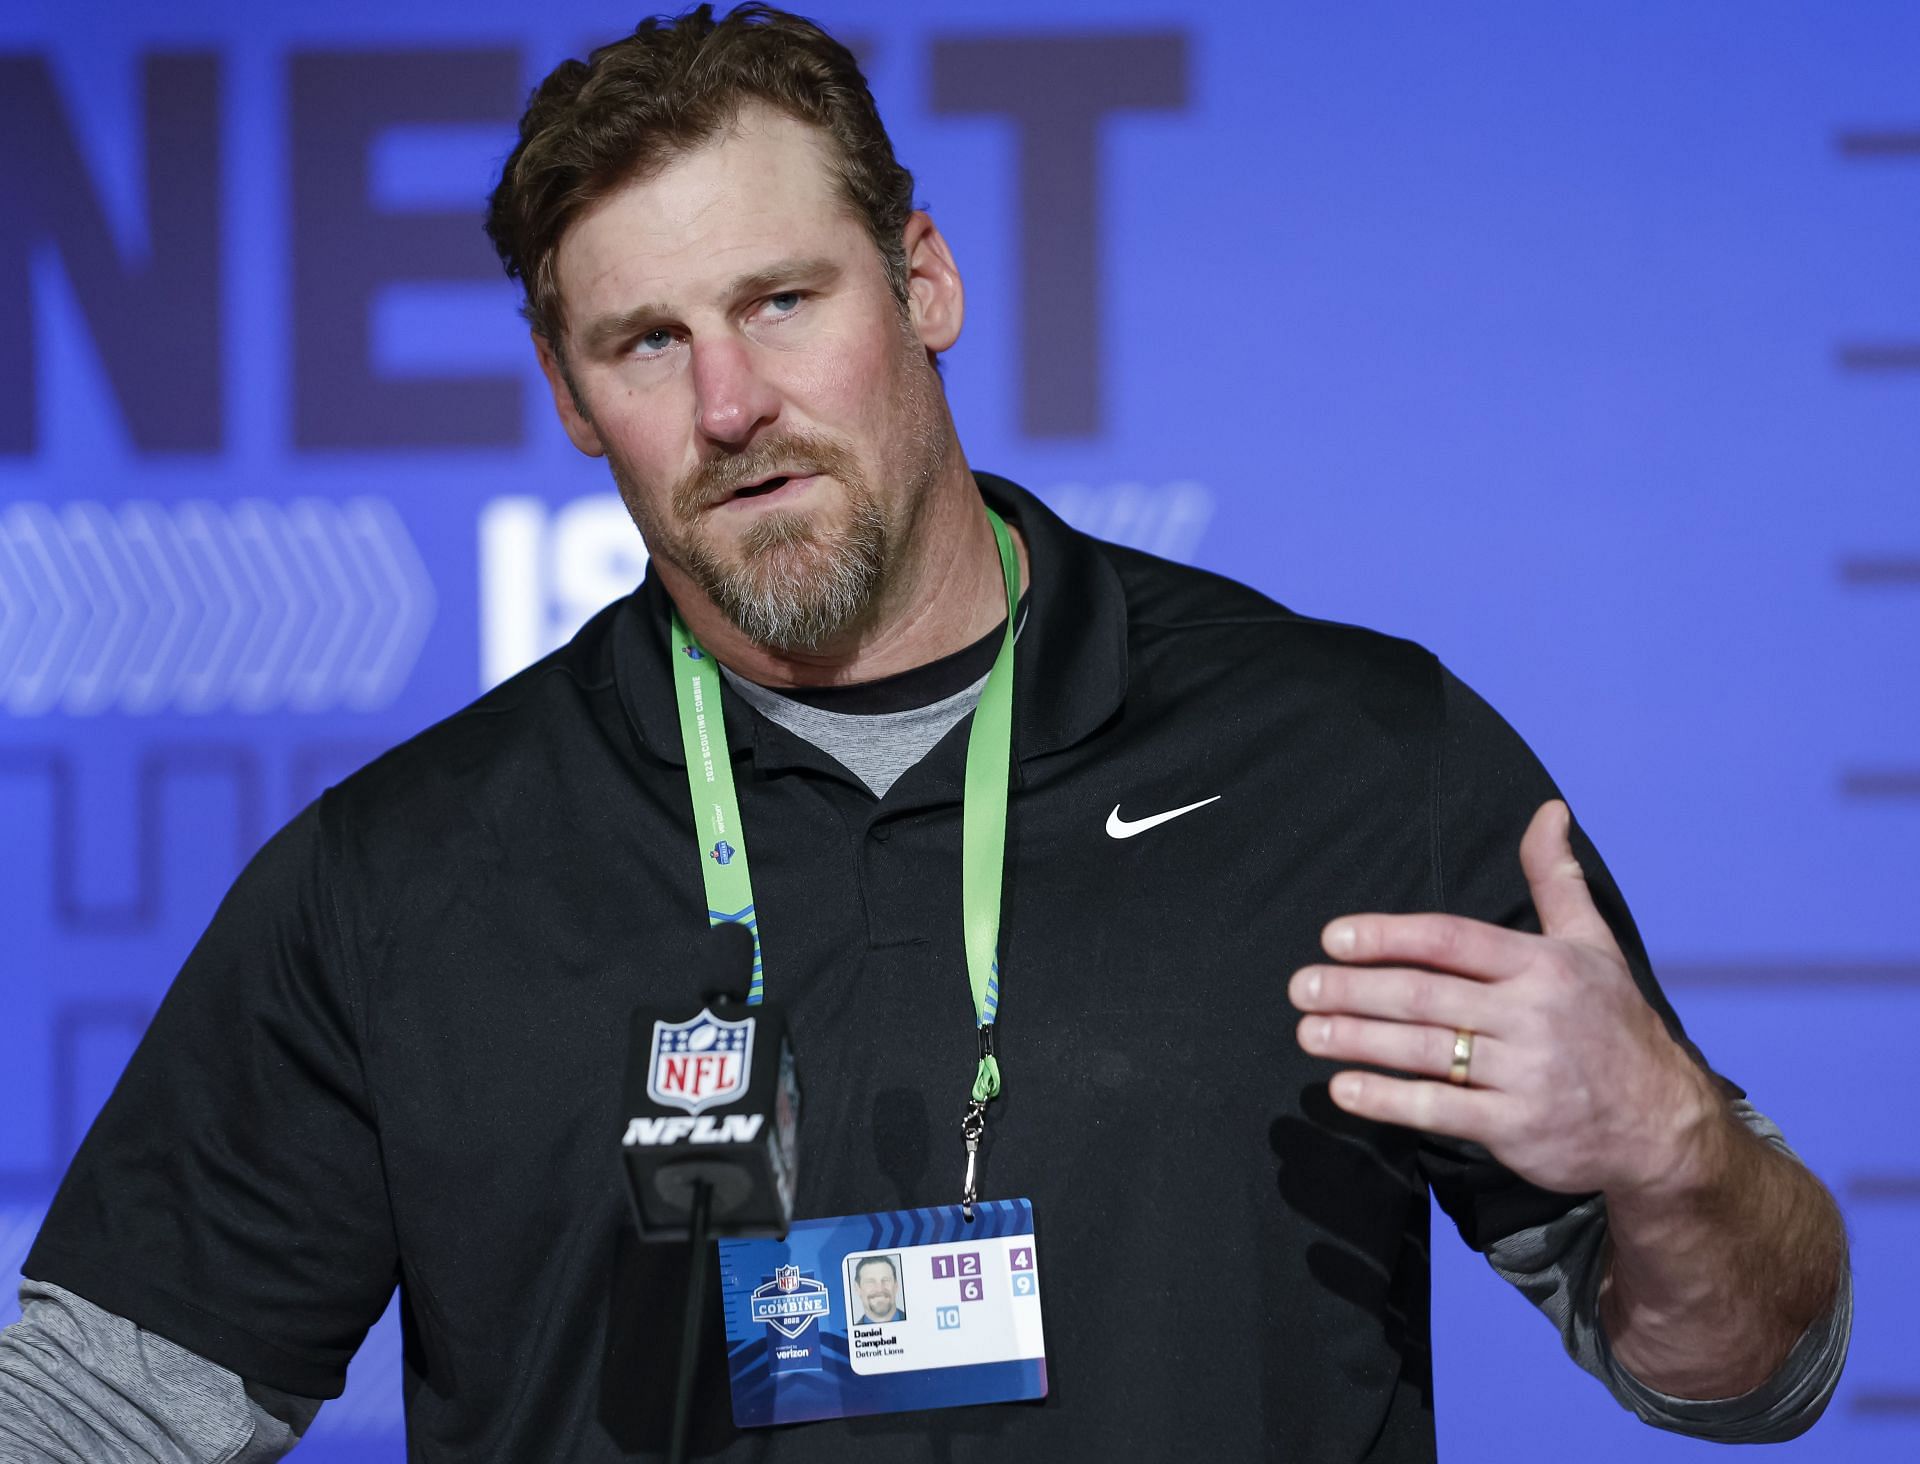 Dan Campbell at the NFL Combine